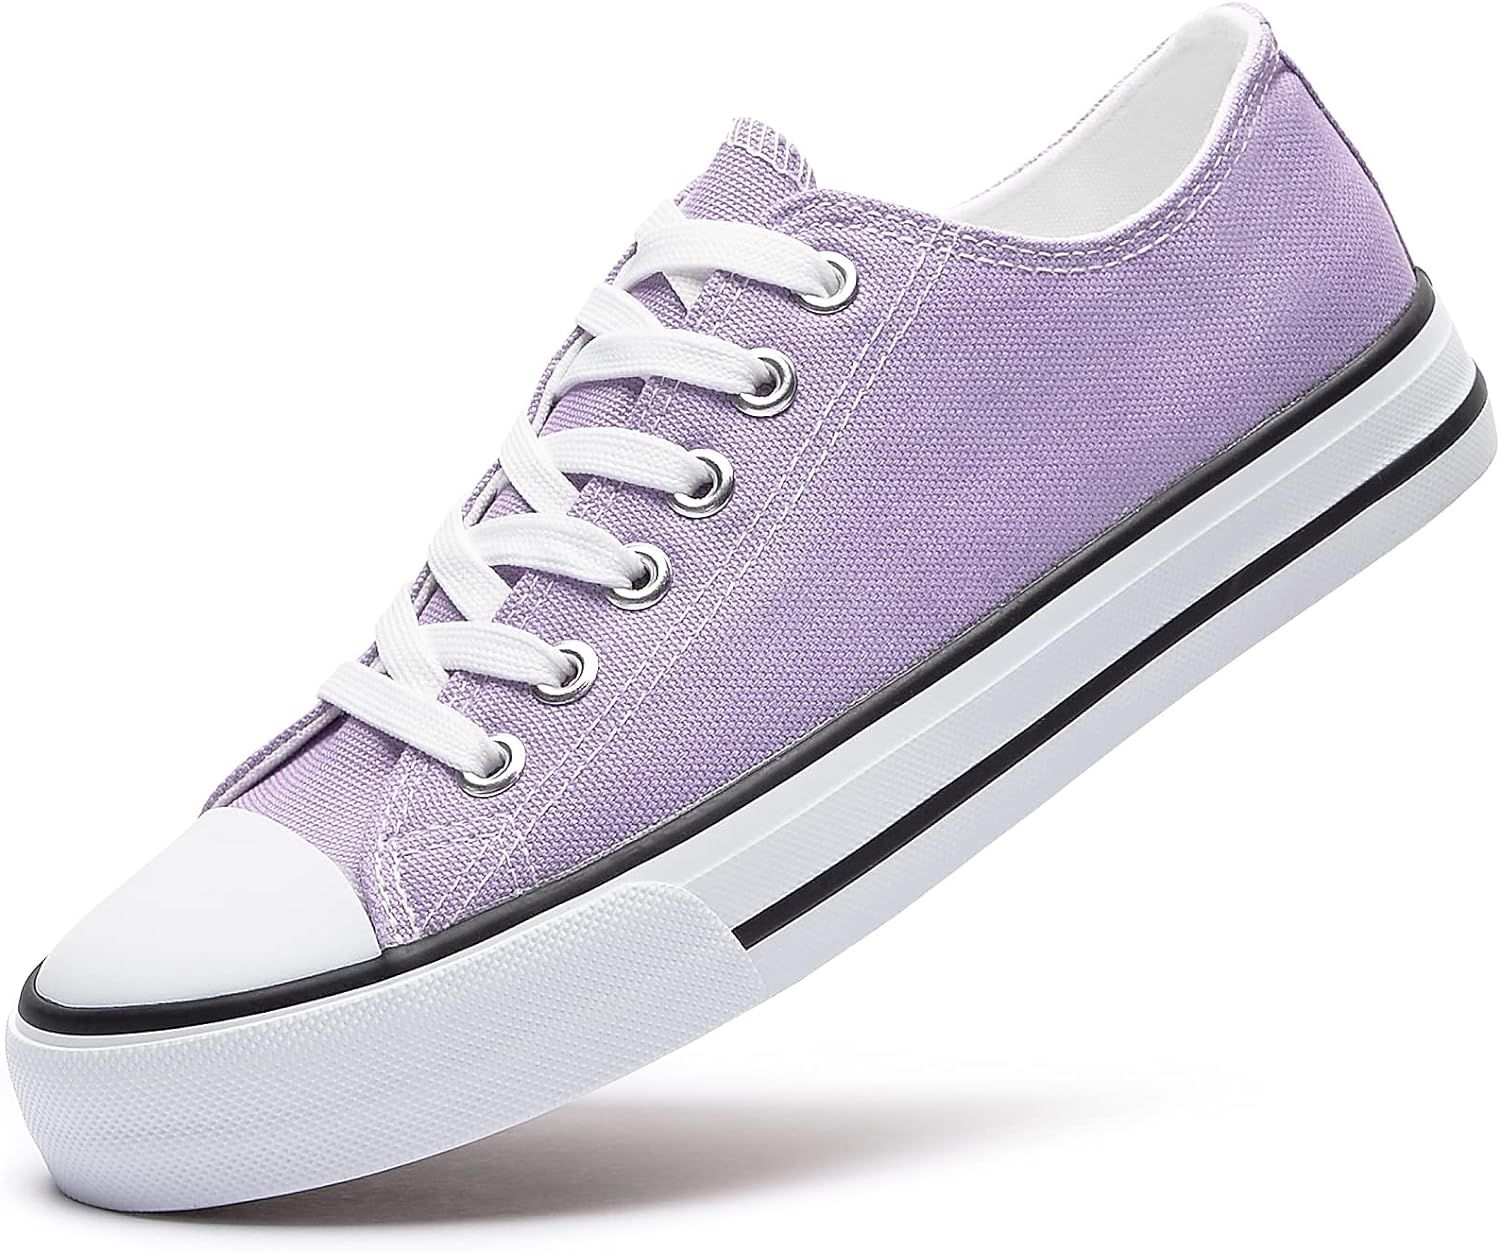 Womens Canvas Sneakers Low Top Lace Up Canvas Shoes Fashion Comfortable… | Amazon (US)